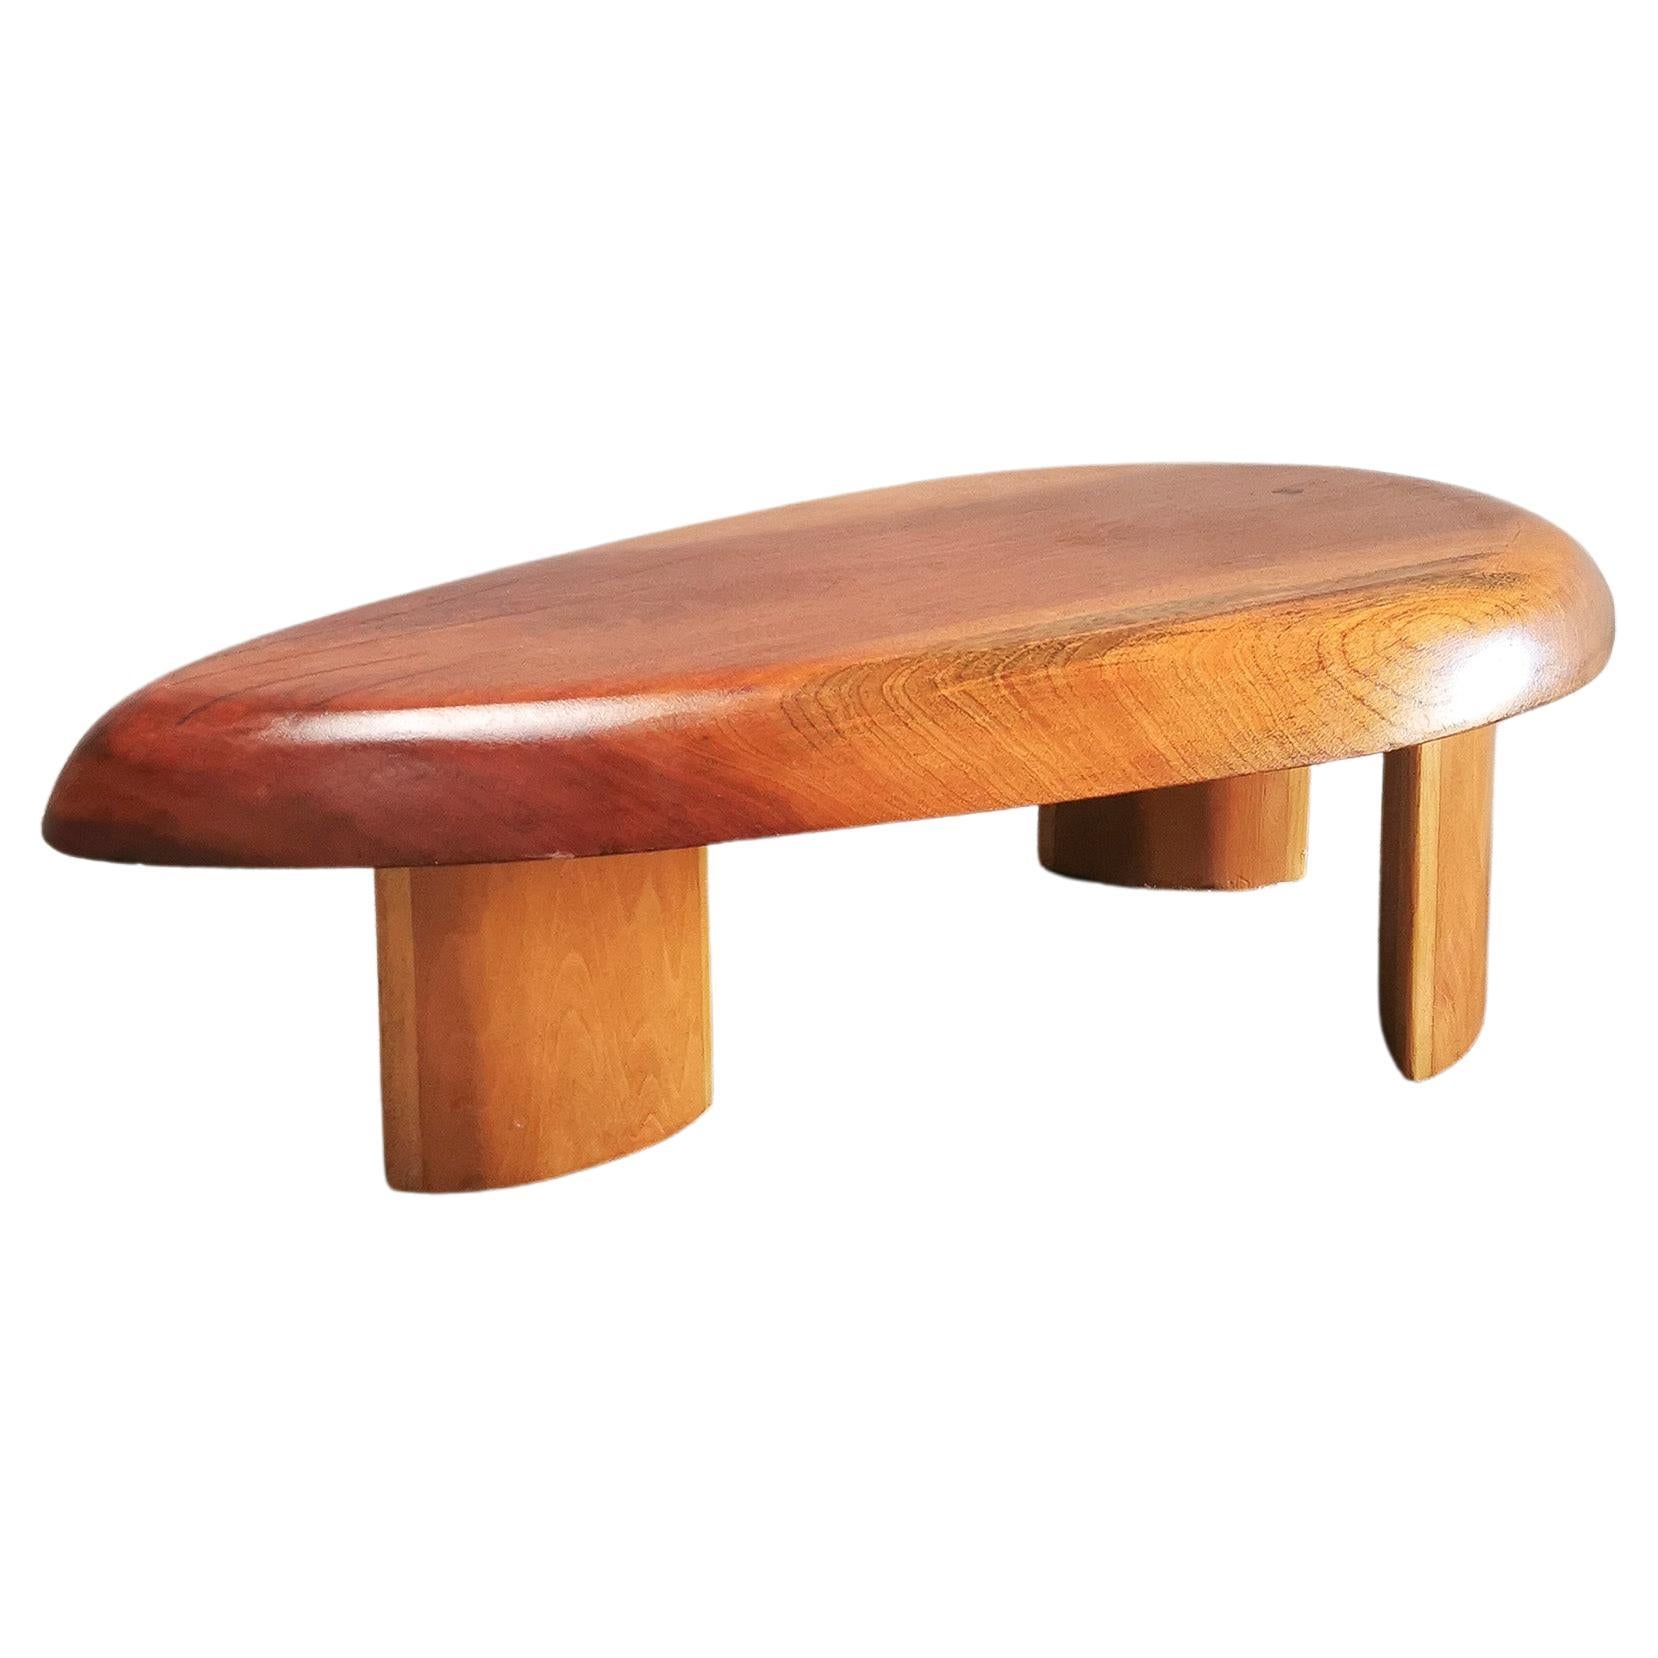 French 'Forme Libre' Coffee Table In The Style Of Charlotte Perriand, 1950's For Sale